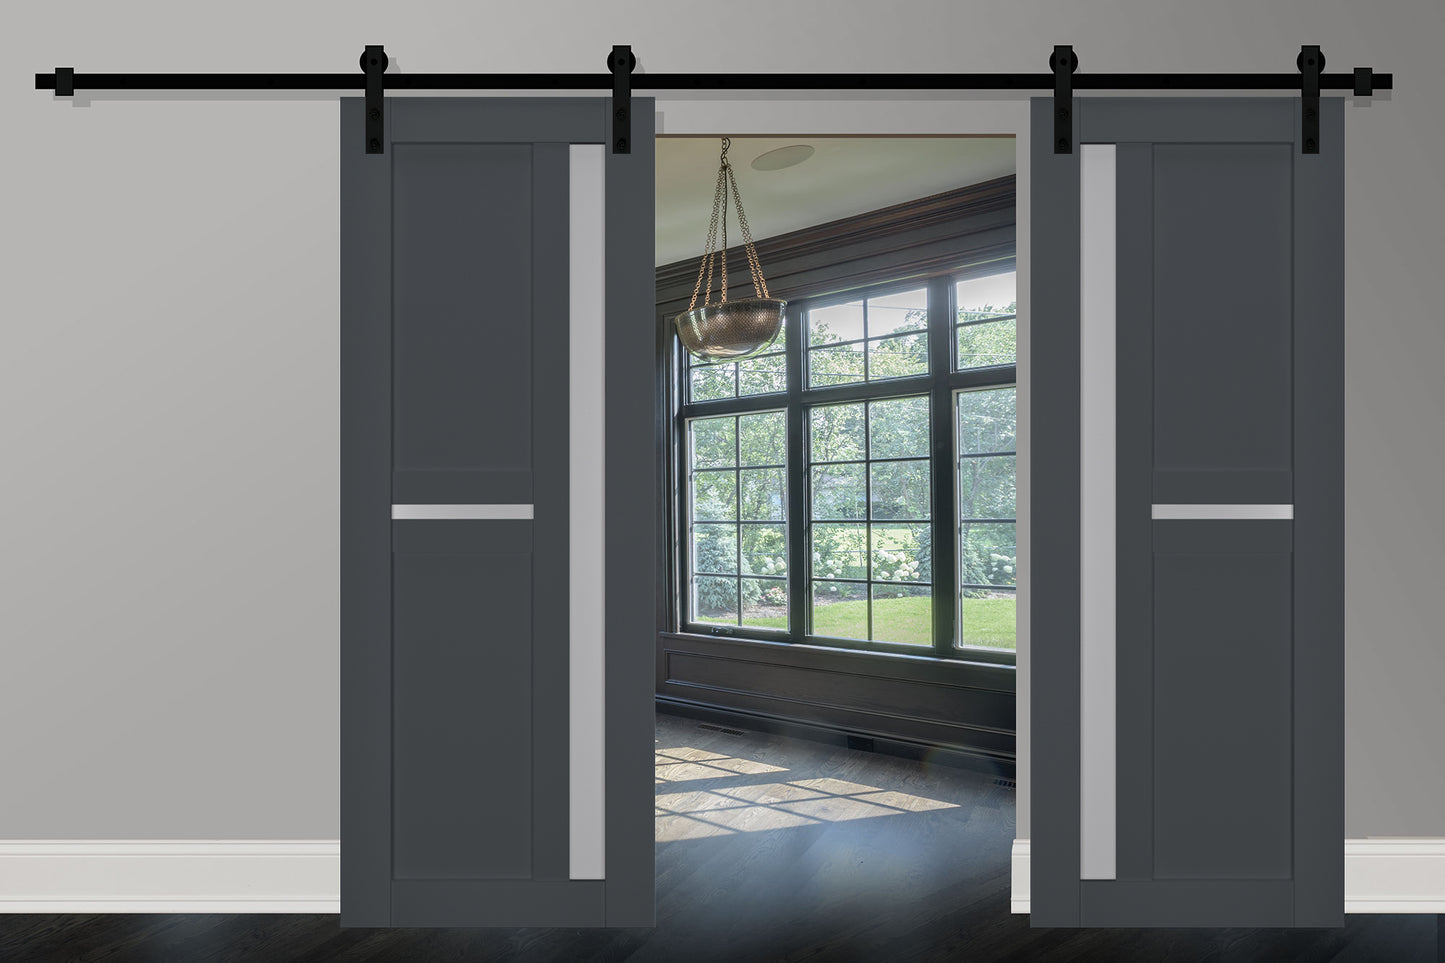 Veregio 7288 Antracite Double Barn Door with Frosted Glass and Black Rail